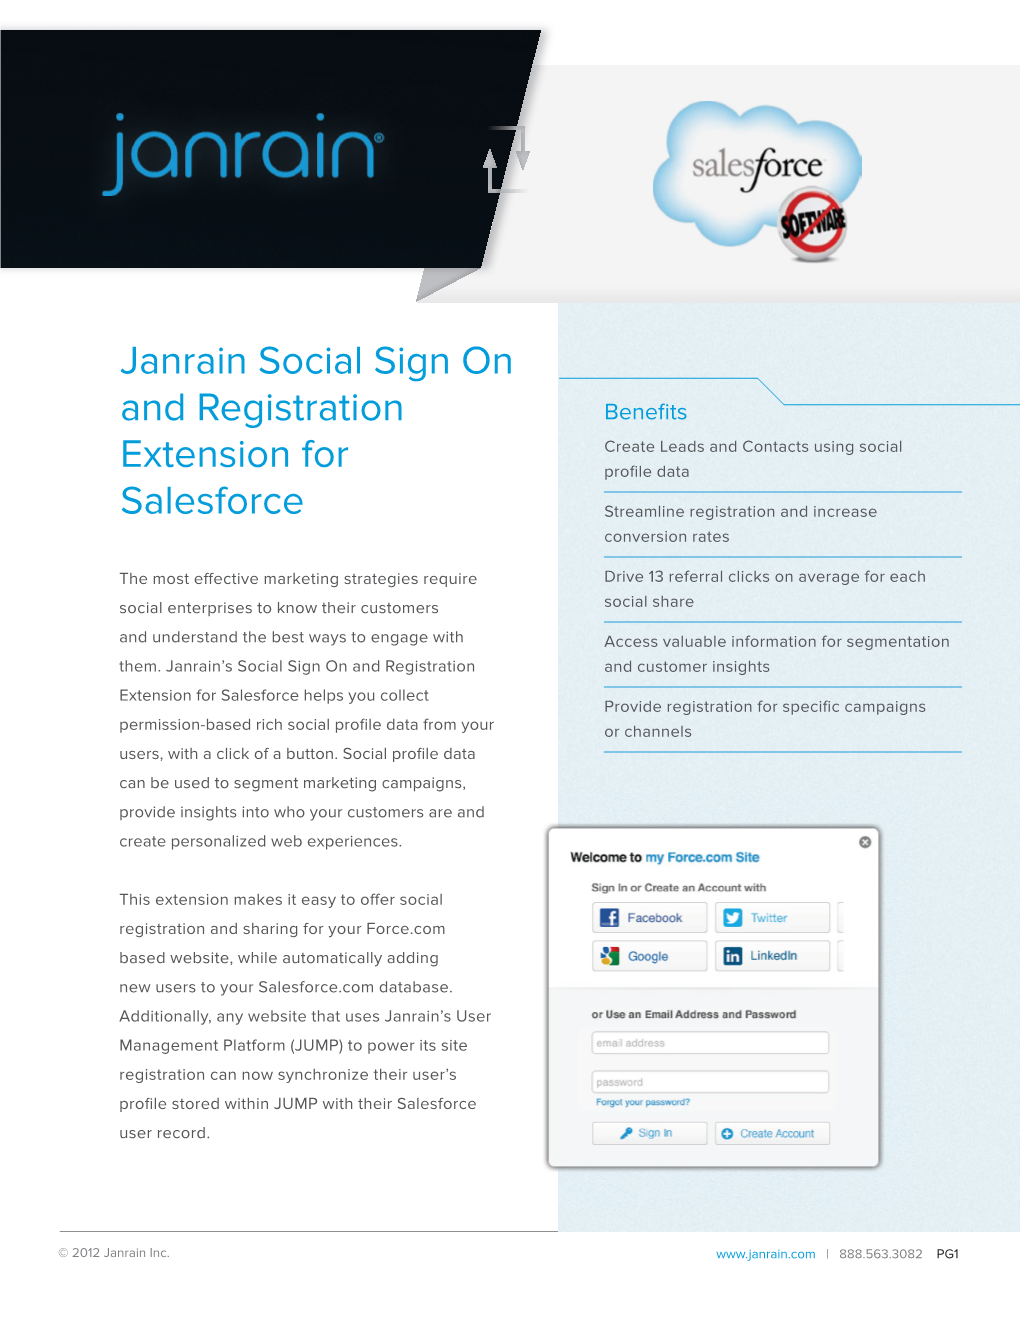 Janrain Social Sign on and Registration Extension for Salesforce